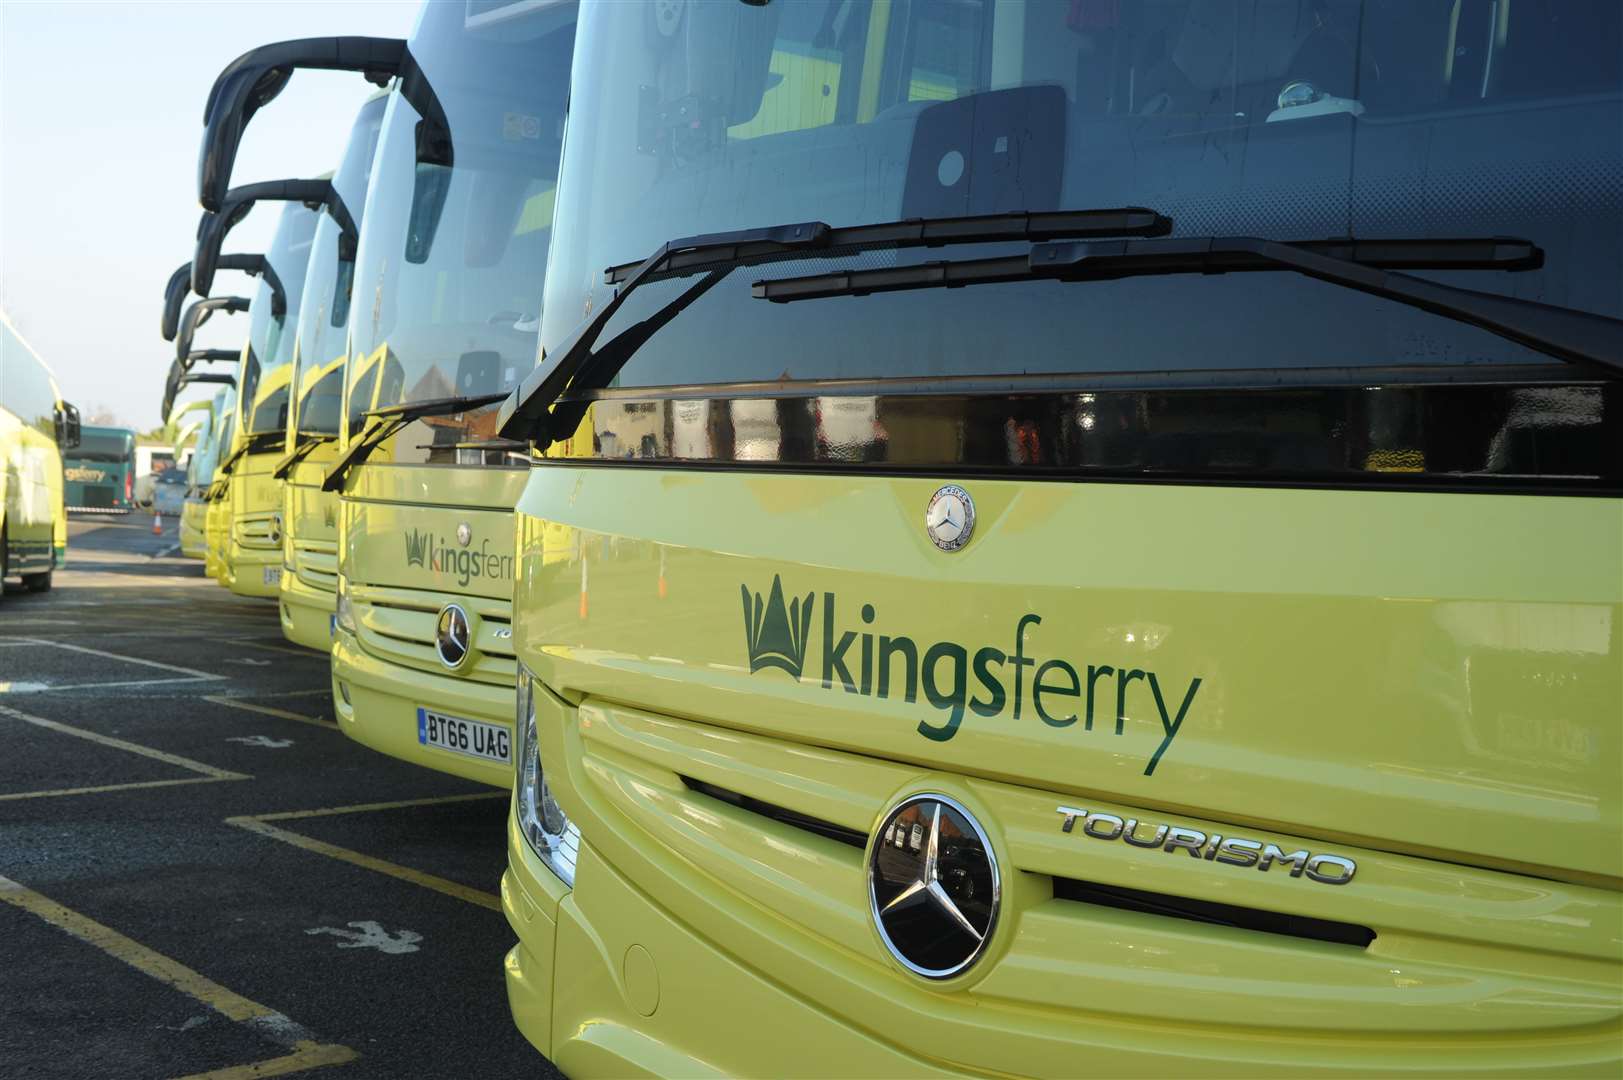 King Ferry hope its new training academy will produce the next generation of drivers